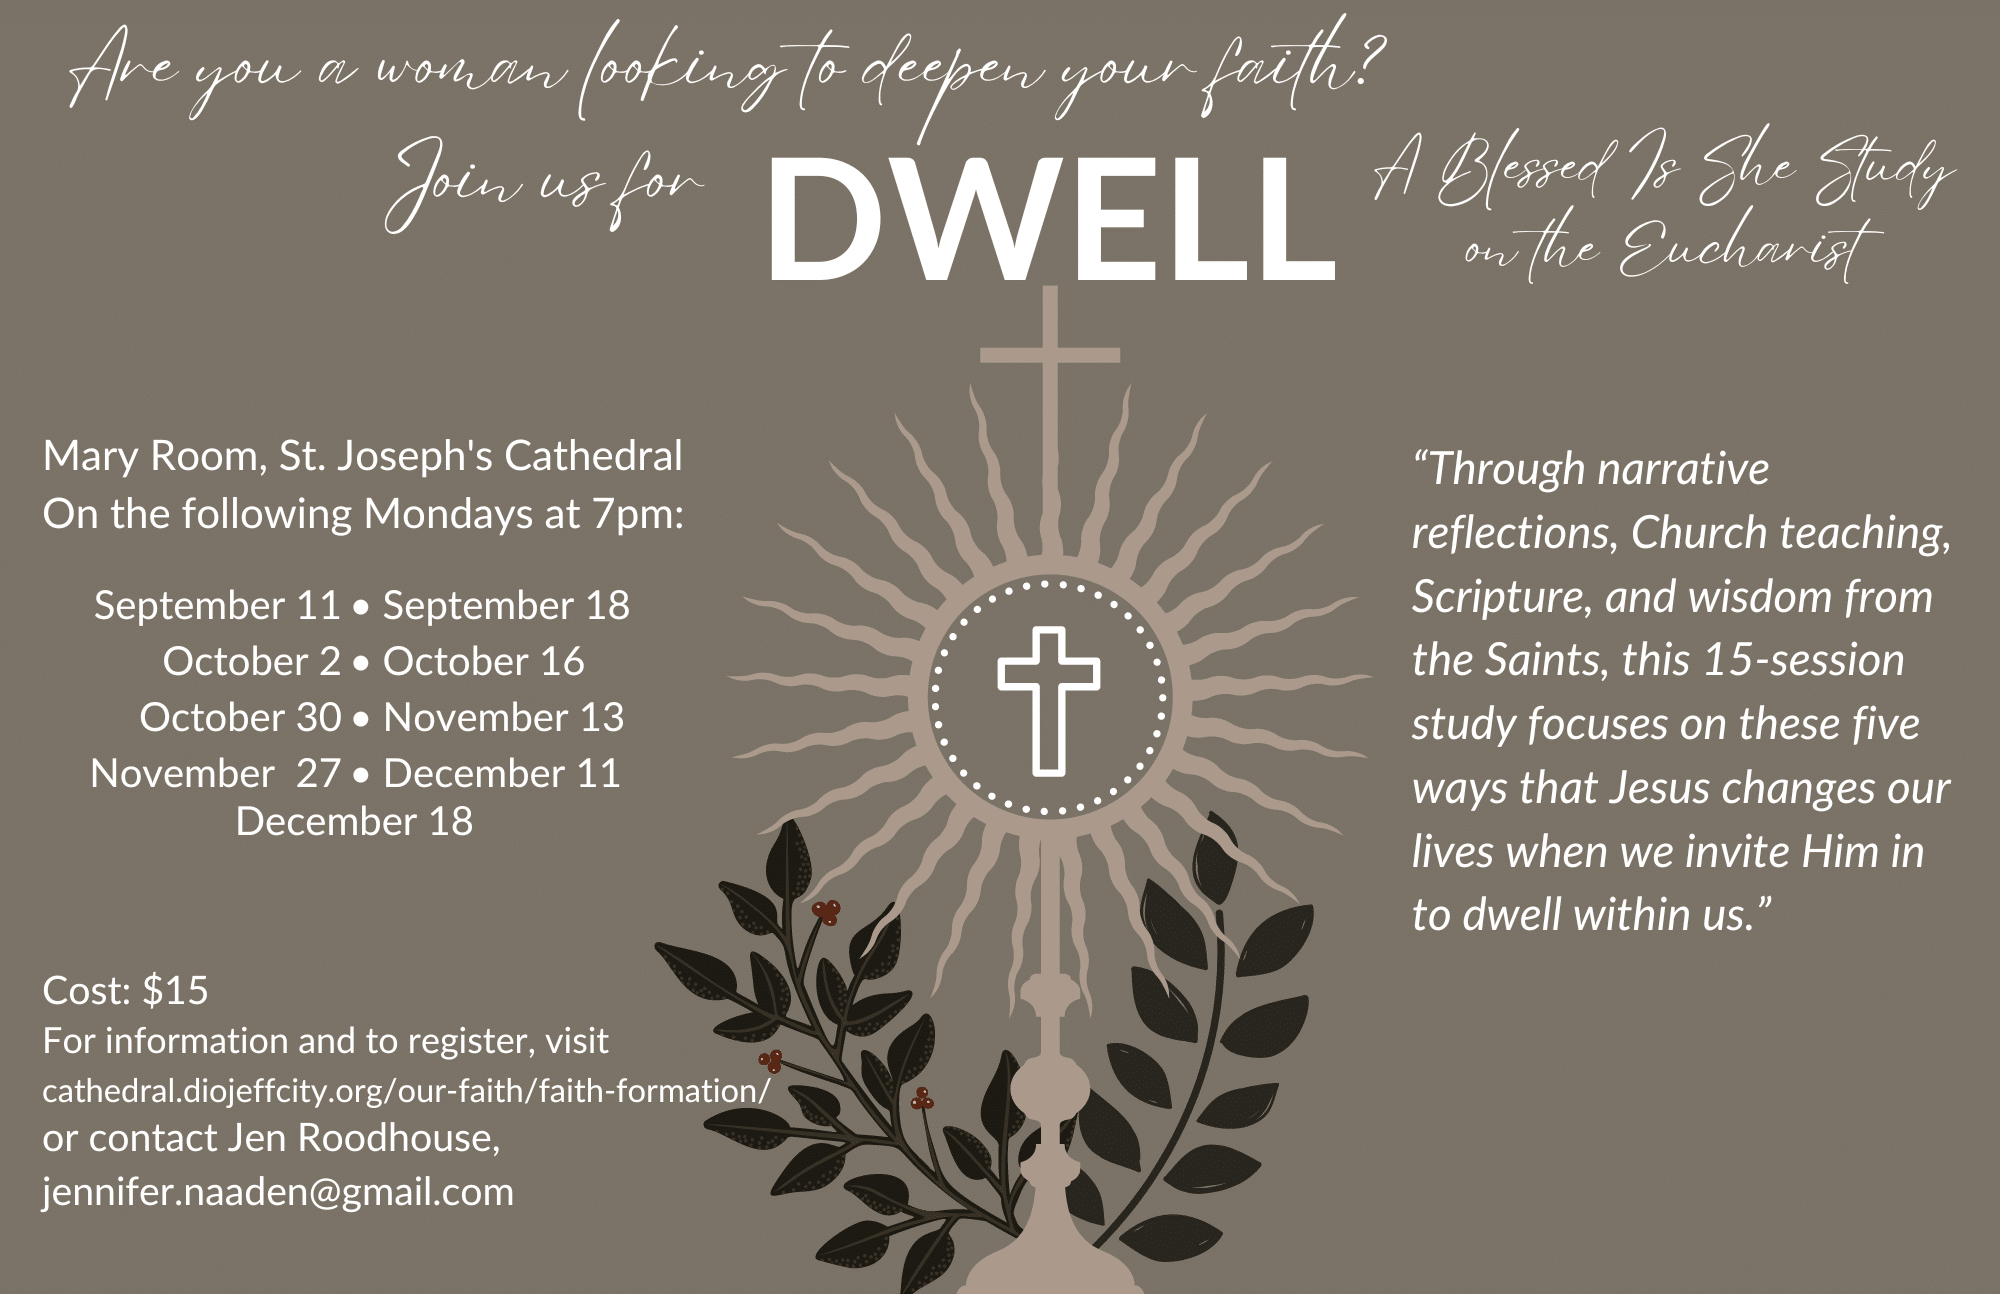 Are you a woman looking to deepen your faith? Join us for Dwell: A Blessed Is She Study on the Eucharist “Through narrative reflections, Church teaching, Scripture, and wisdom from the Saints, this 15-session study focuses on these five ways that Jesus changes our lives when we invite Him in to dwell within us.” Mary Room, St. Joseph's Cathedral On the following Mondays at 7pm: 9/11, 9/18, 10/2, 10/16, 10/30, 11/13, 11/27, 12/11, 12/188 Cost: $15 For information and to register, visit cathedral.diojeffcity.org/our-faith/faith-formation/ or contact Jen Roodhouse, jennifer.naaden@gmail.com